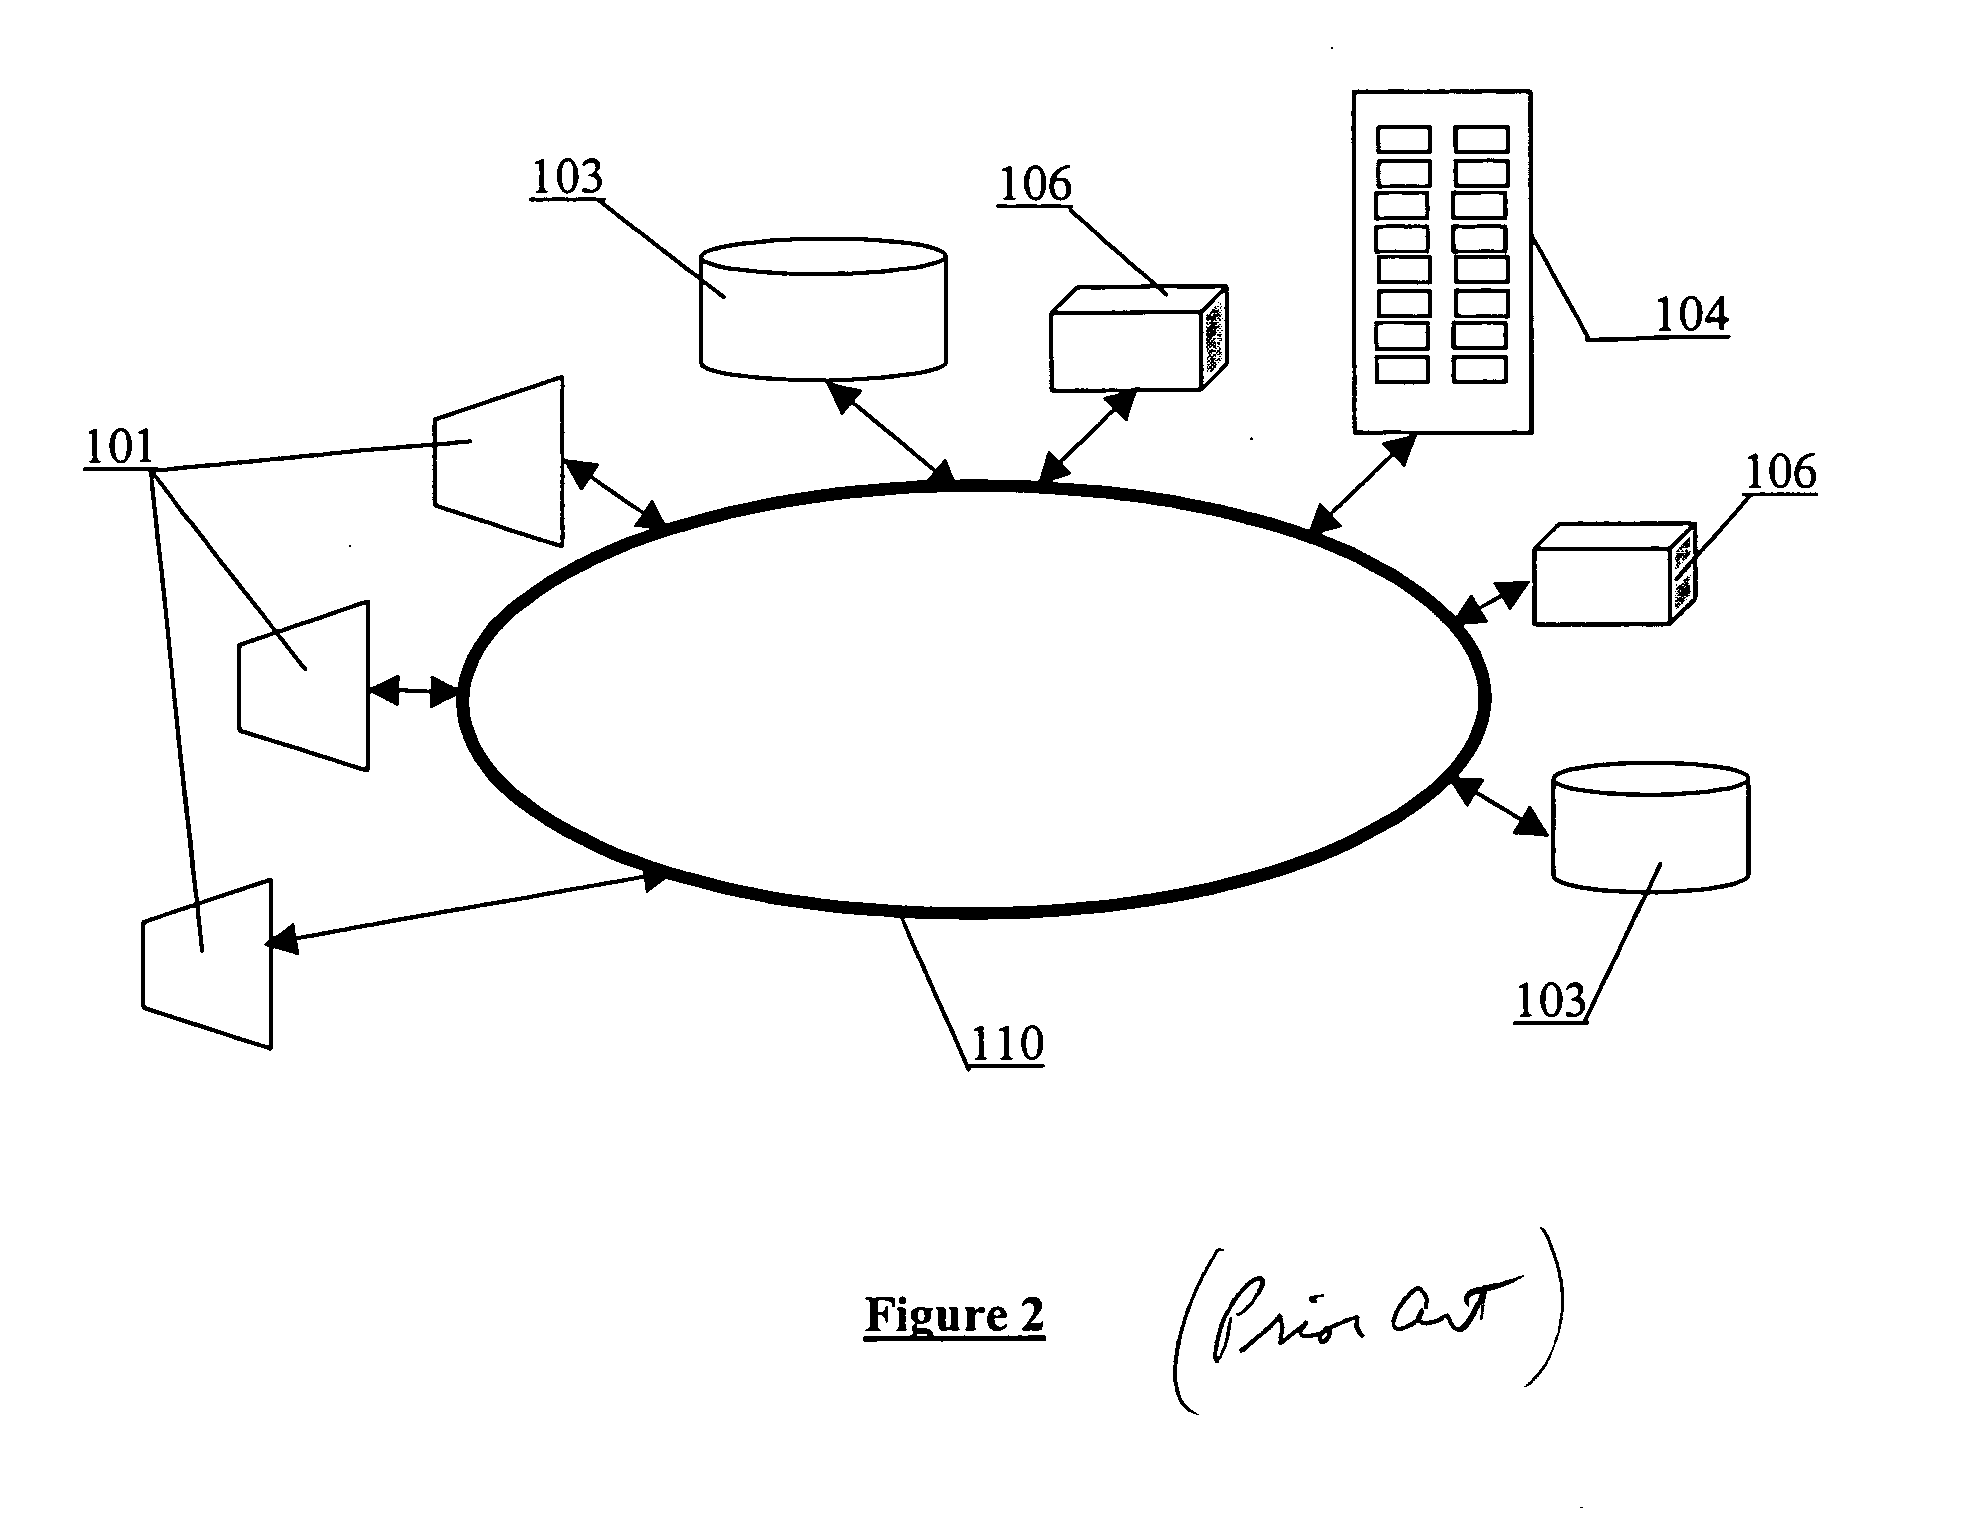 Disk drive with integrated tape drive